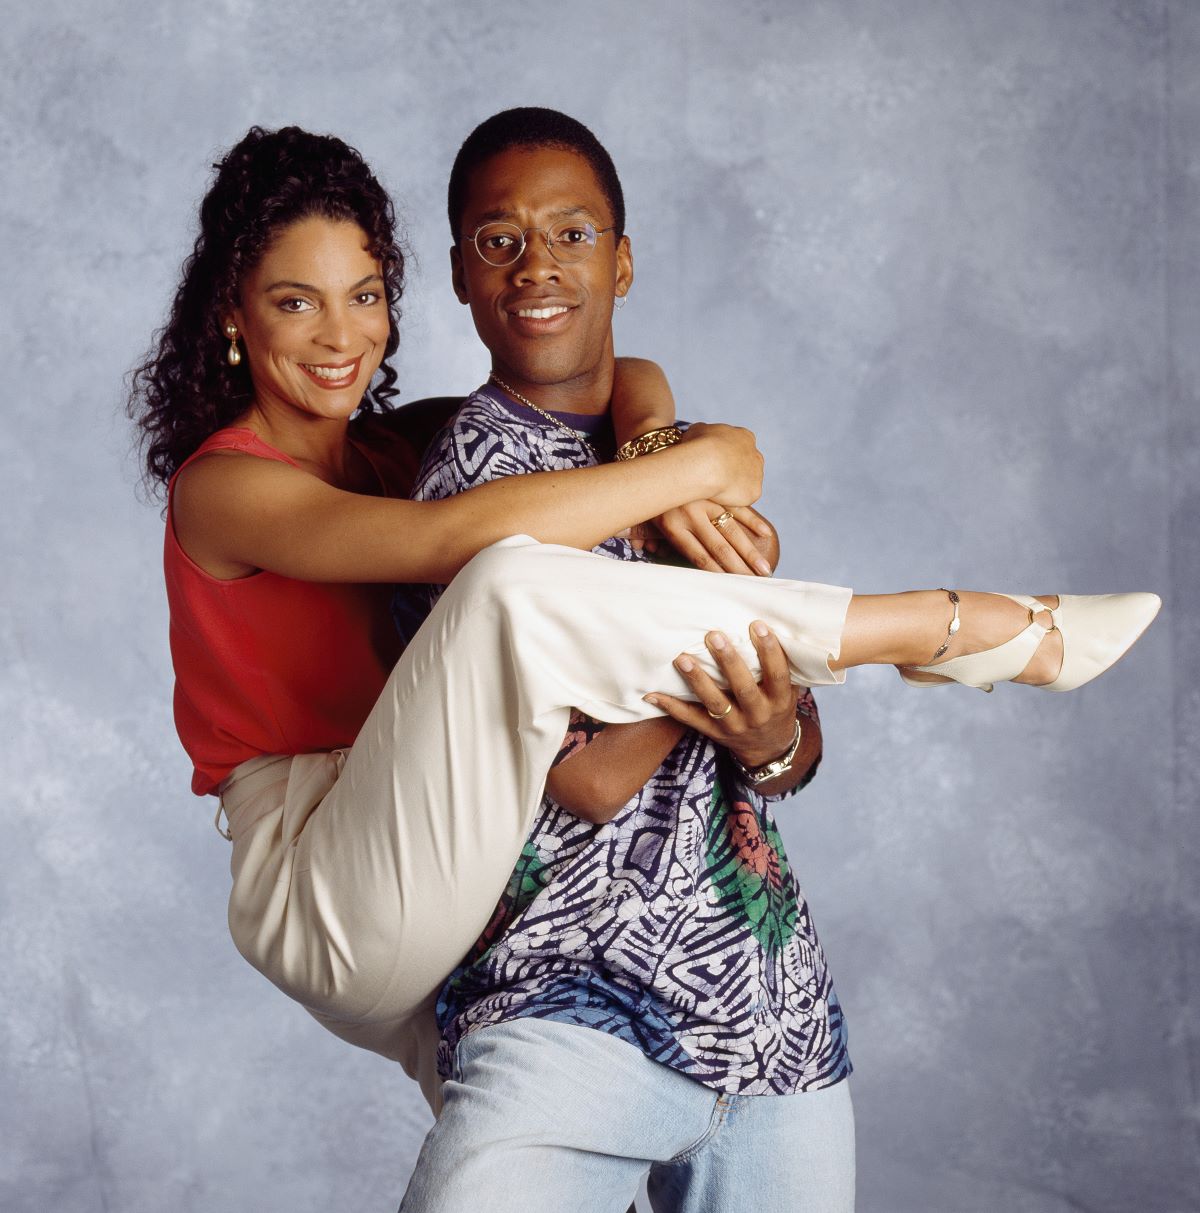 'A Different World' stars Jasmine Guy in a red tank top and khaki pants as Whitley Marion Gilbert Wayne and Kadeem Hardison holding Jasmine